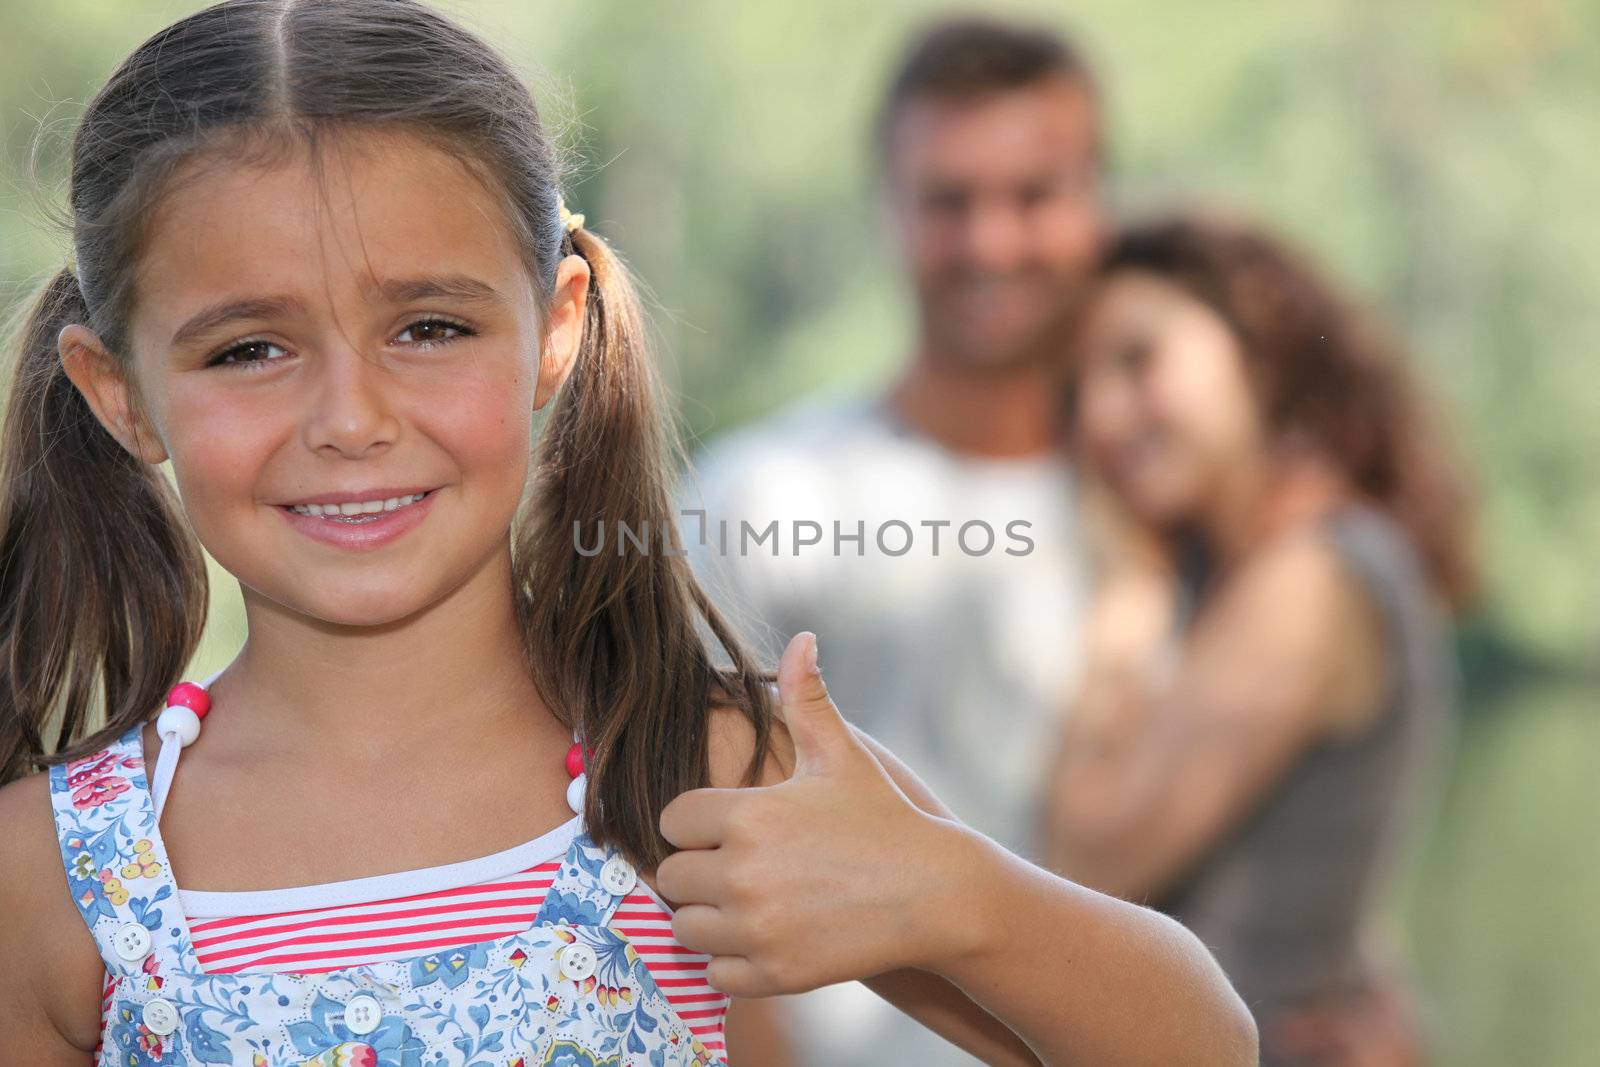 Little girl giving thumbs-up gesture by phovoir